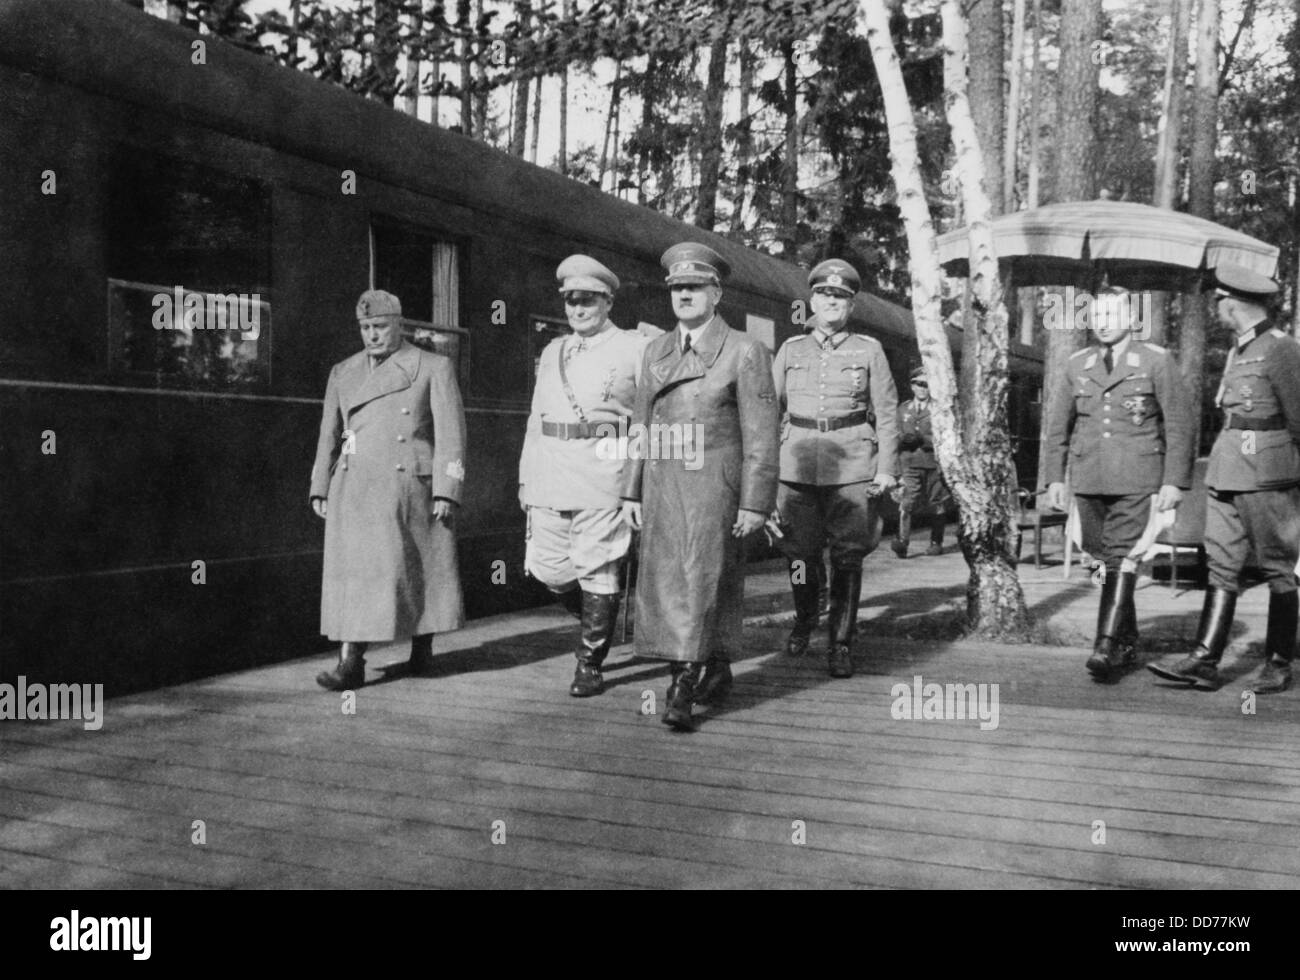 Adolf Hitler, Hermann Goering, and Benito Mussolini. They walk with other German military officers at railroad station, on Stock Photo